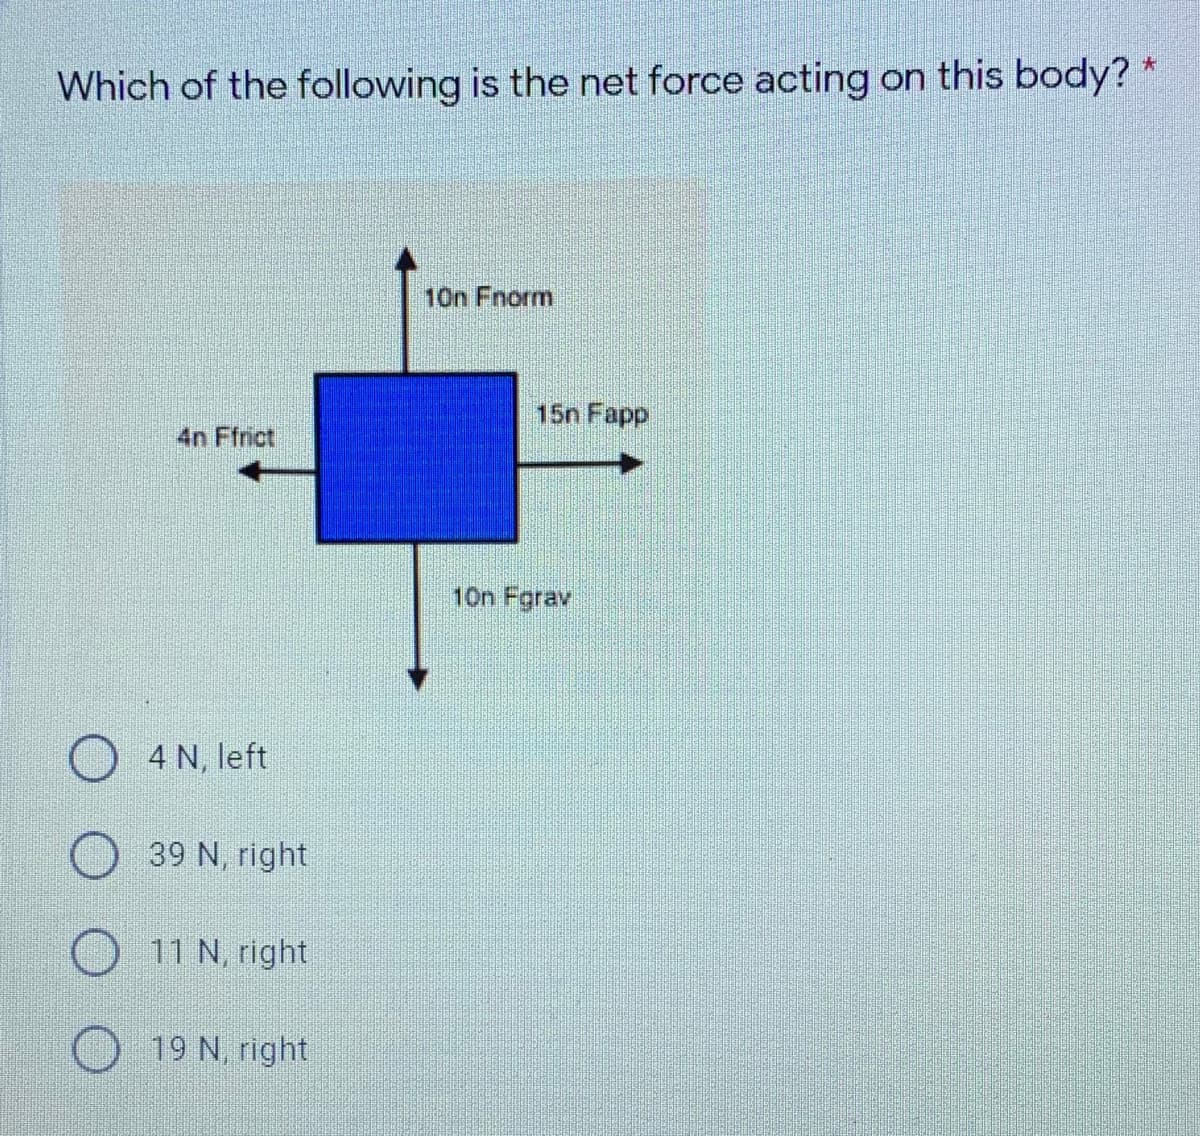 Which of the following is the net force acting on this body? *
10n Fnorm
15n Fapp
4n Ffrict
10n Fgrav
4 N, left
39 N, right
11 N, right
19 N, right
